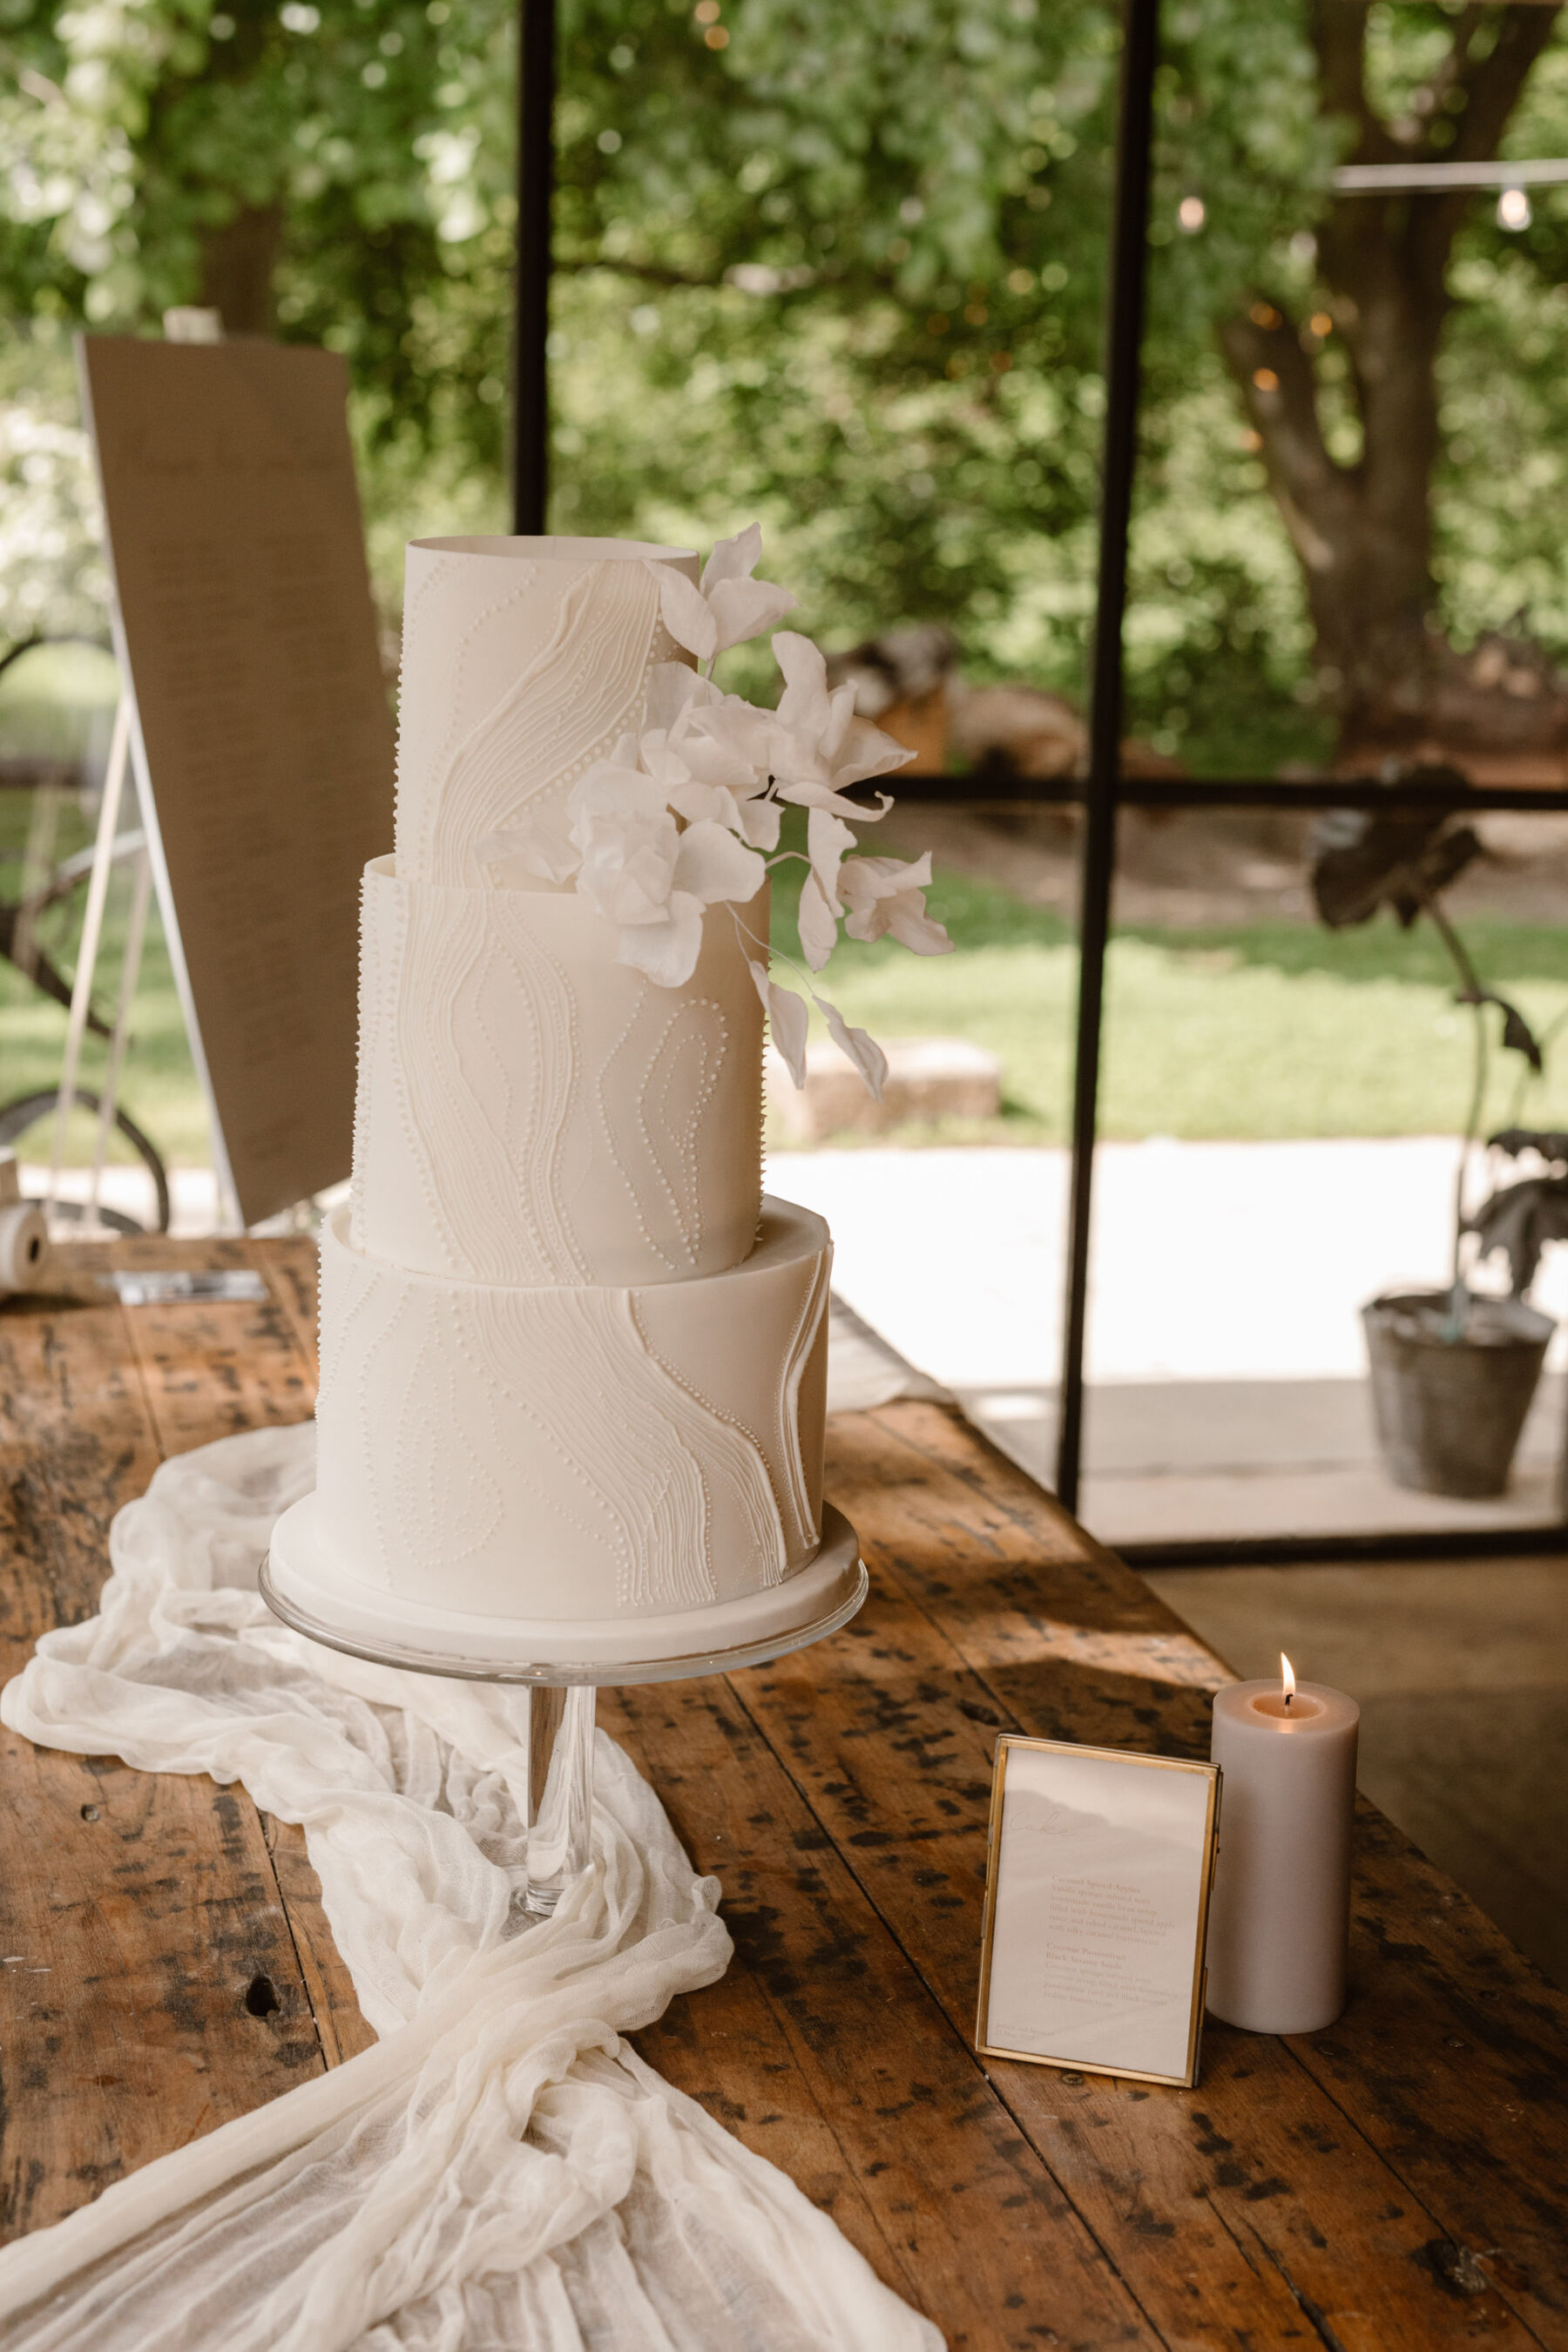 3 tier white wedding cake with iced orchids by Marble Cake Company. Agnes Black Photography.